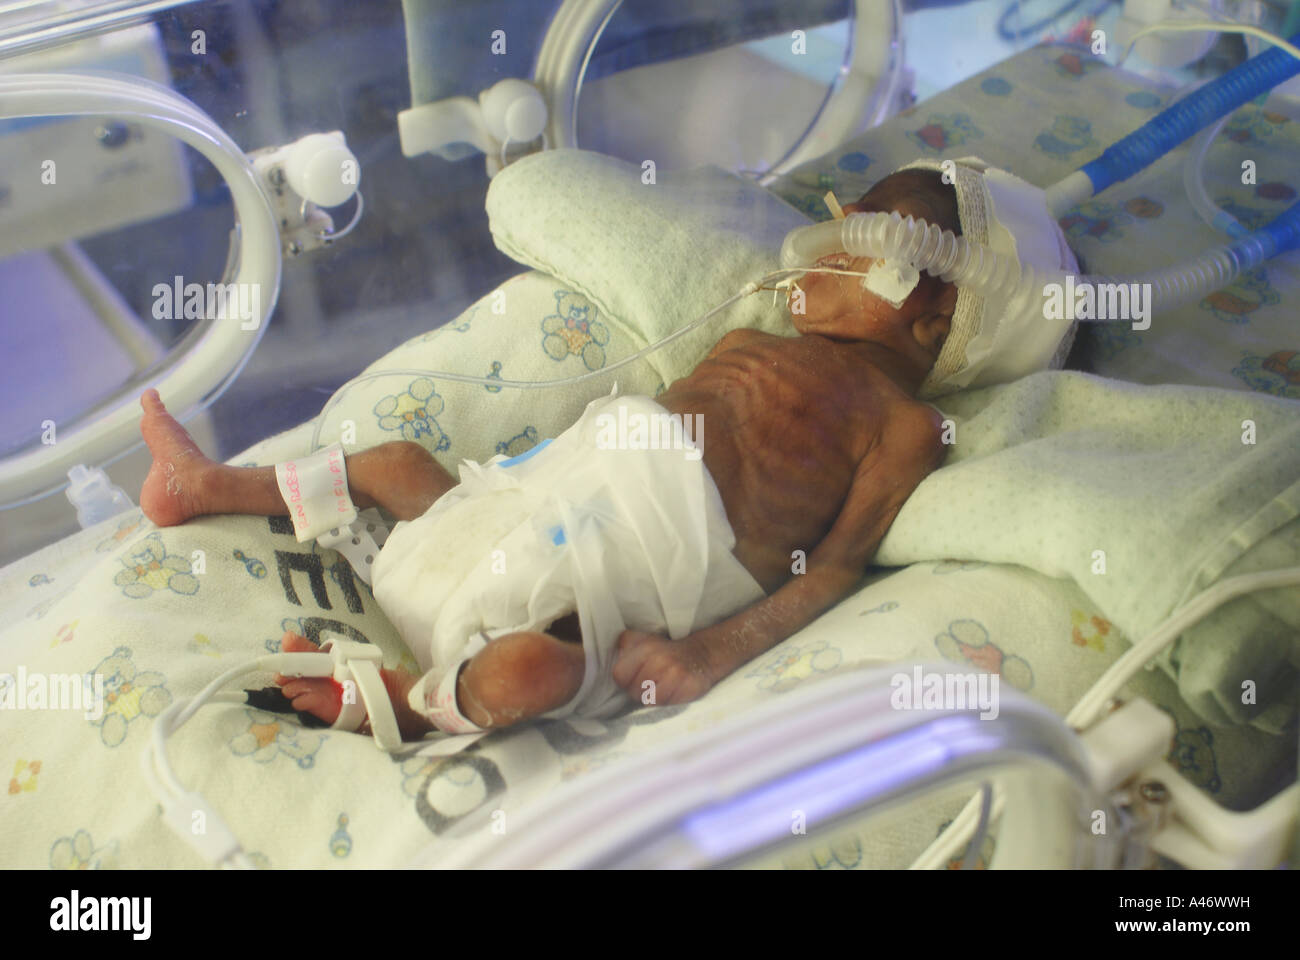 Premature infant at the intensive care, Recife, Brazil Stock Photo